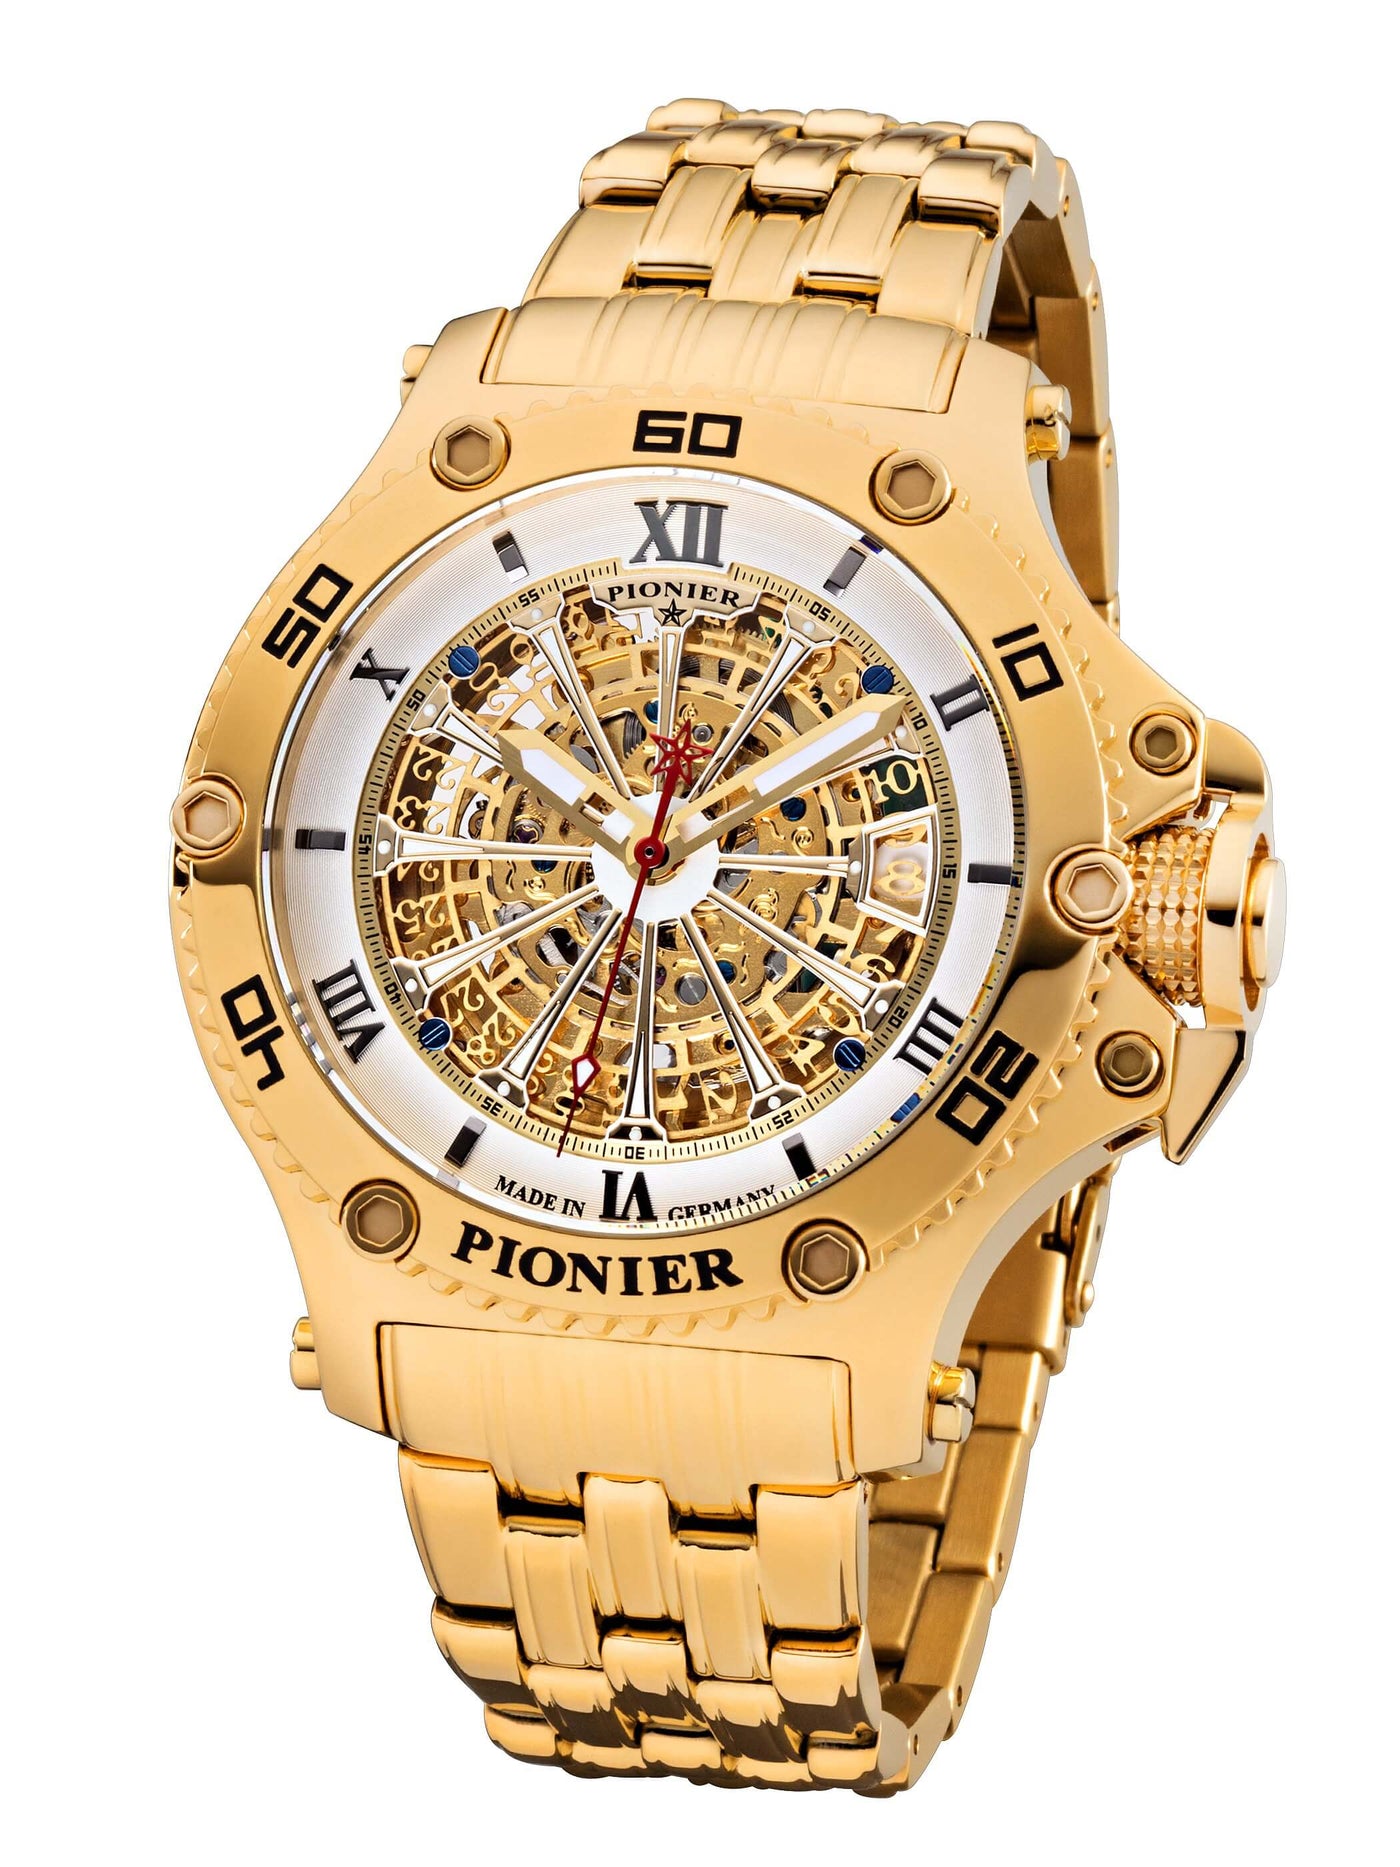 Barcelona Pionier GM-516-9 | Gold | Made in Germany